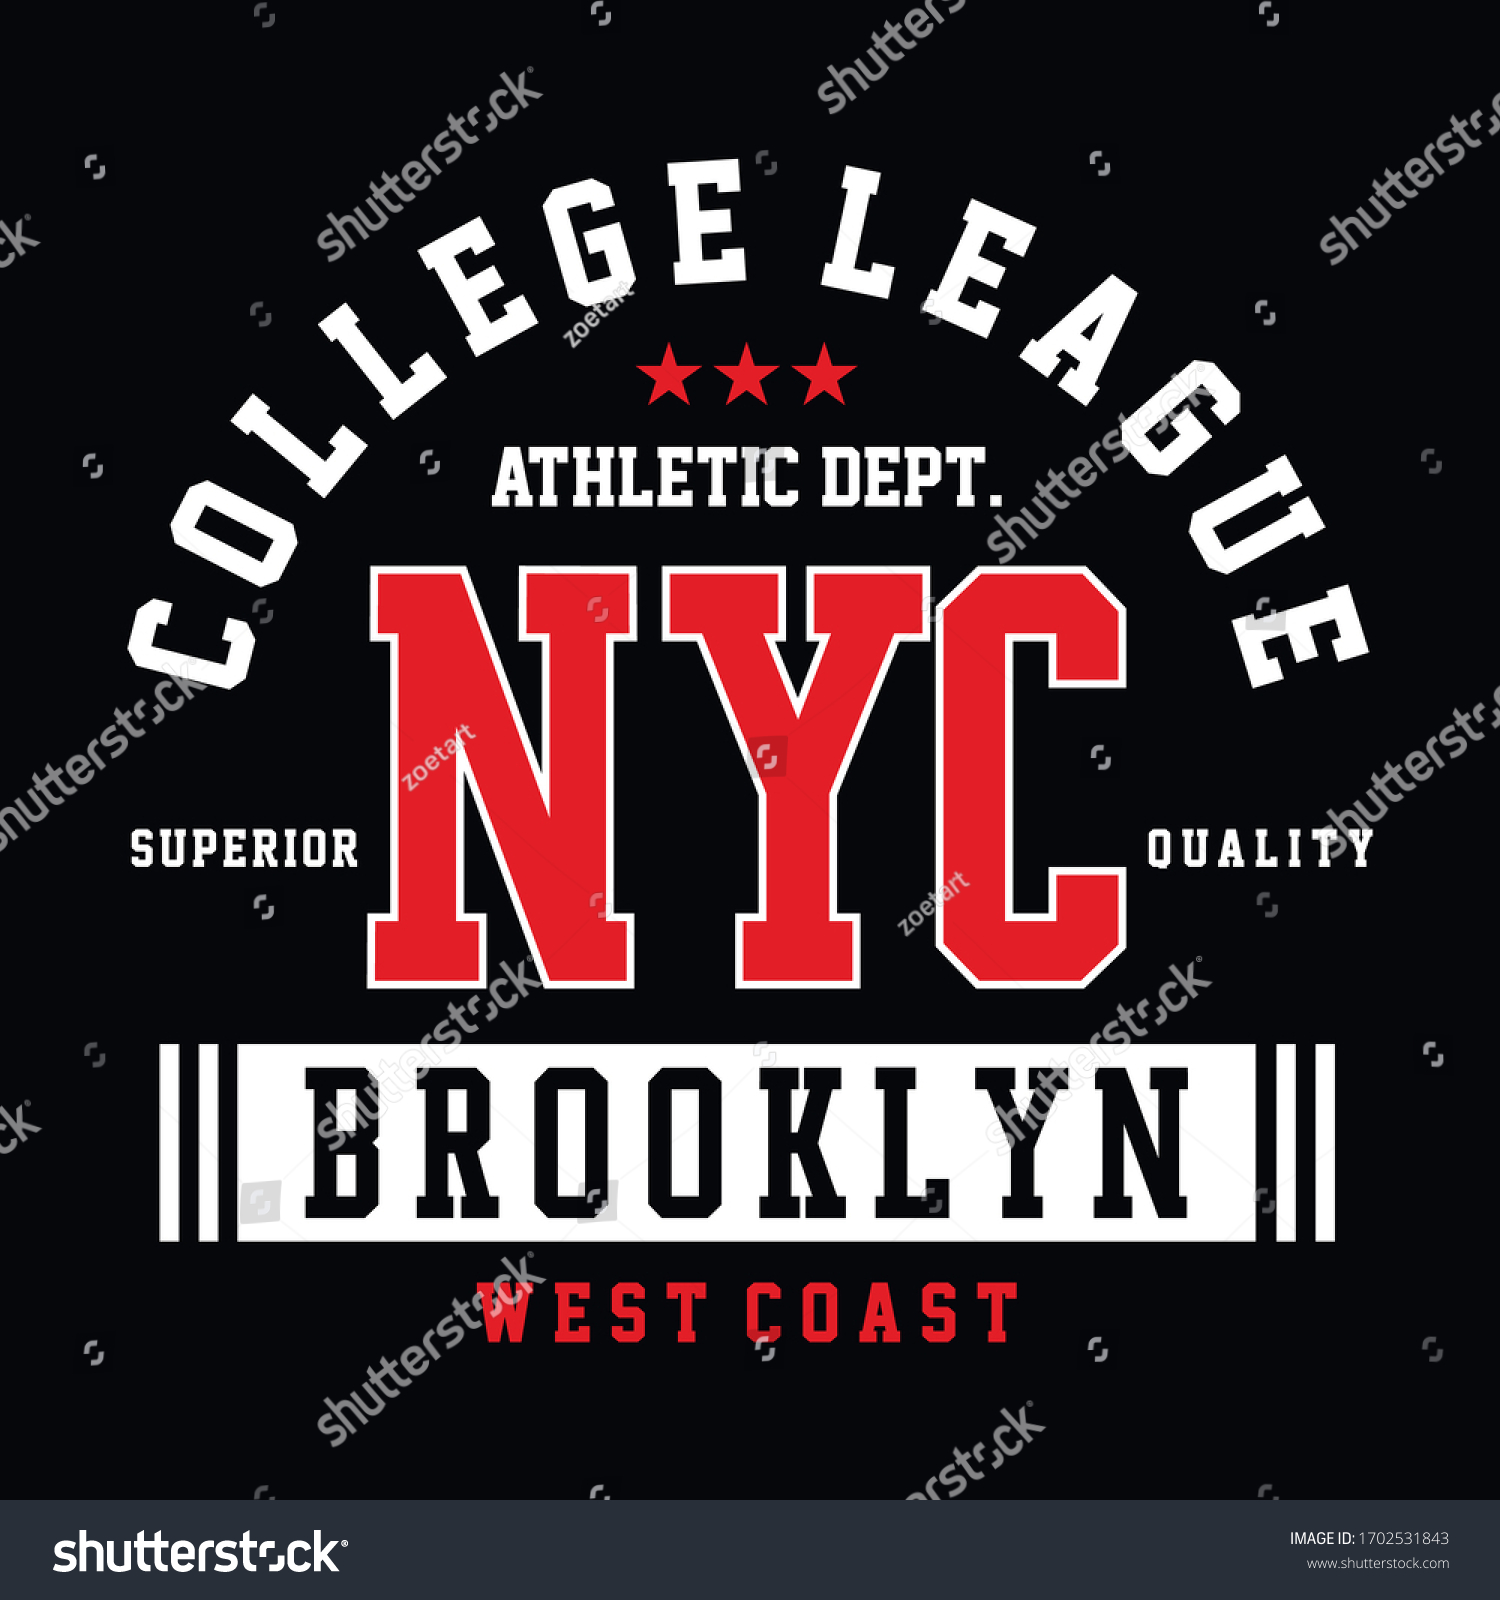 New York Brooklyn Typography Design Clothes Stock Vector (Royalty Free ...